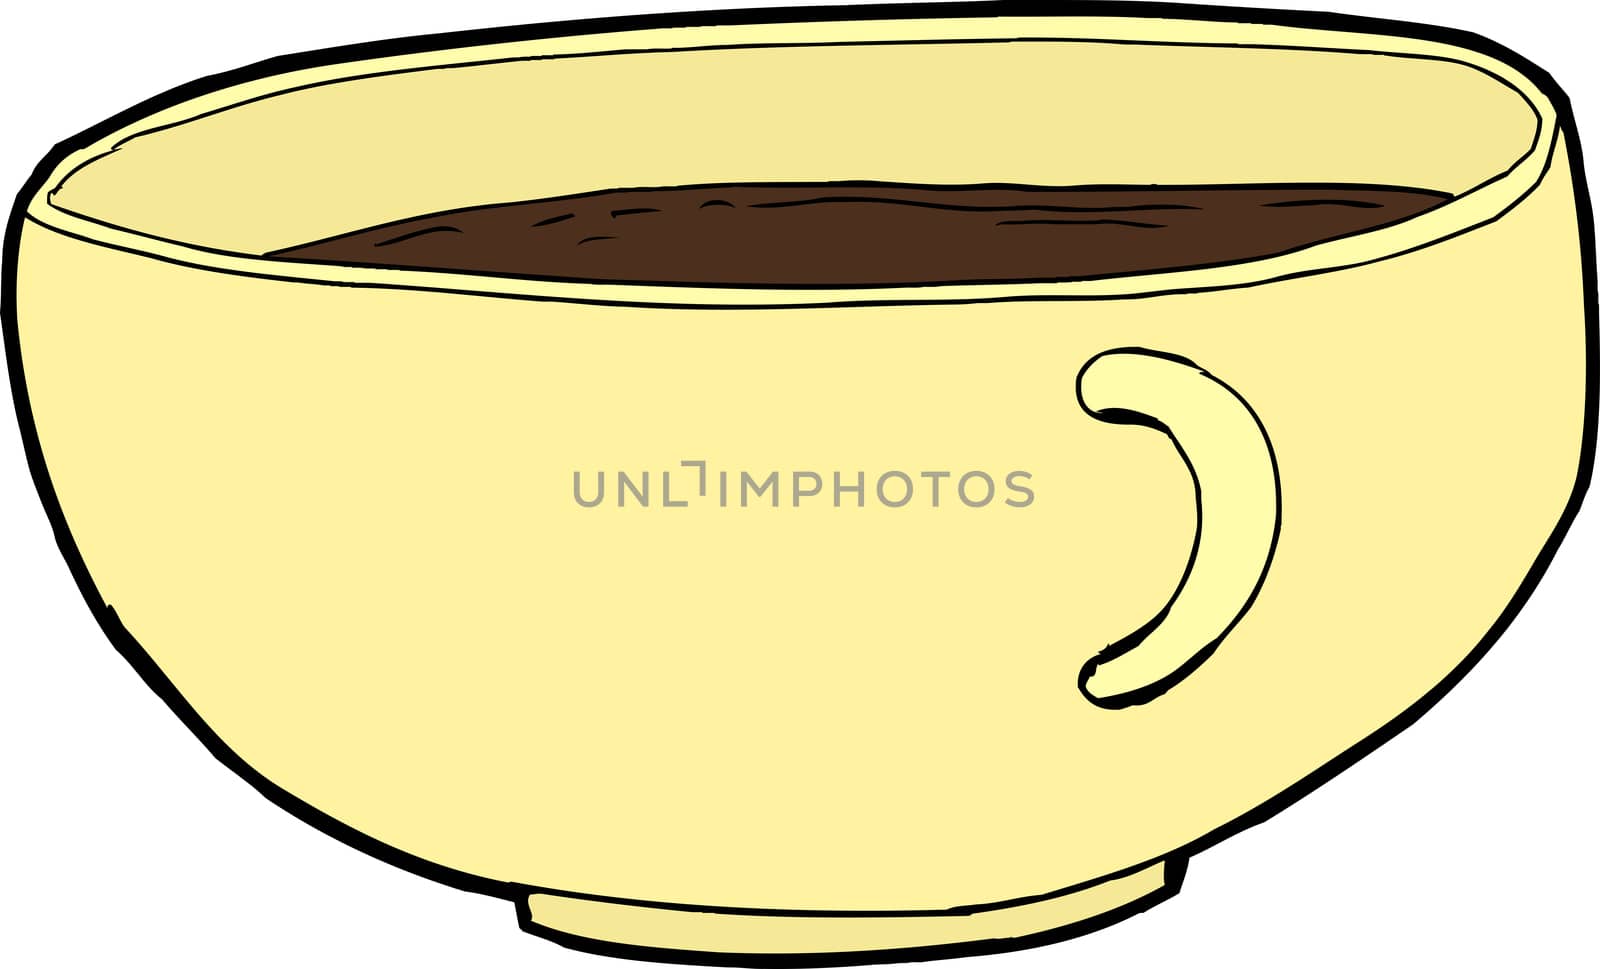 Isolated cartoon full cup of coffee over white